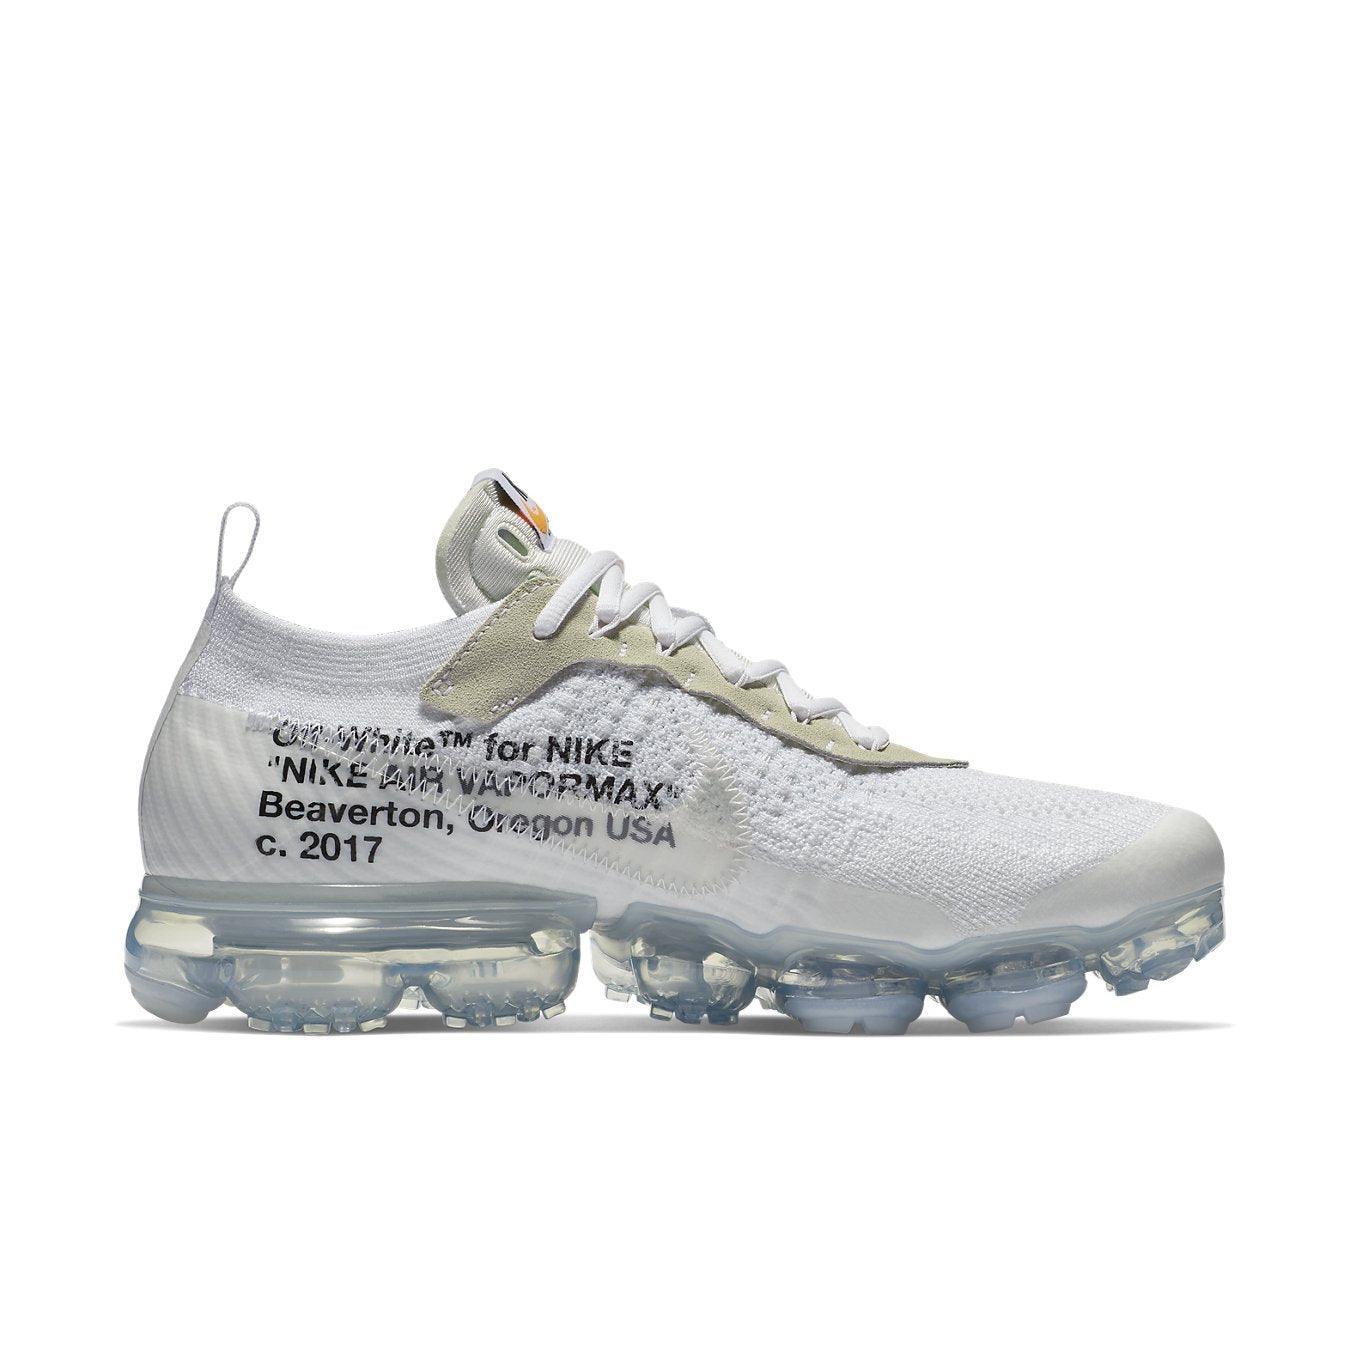 Nike Air Vapormax Off-White 2018 AA3831-100 — dropout